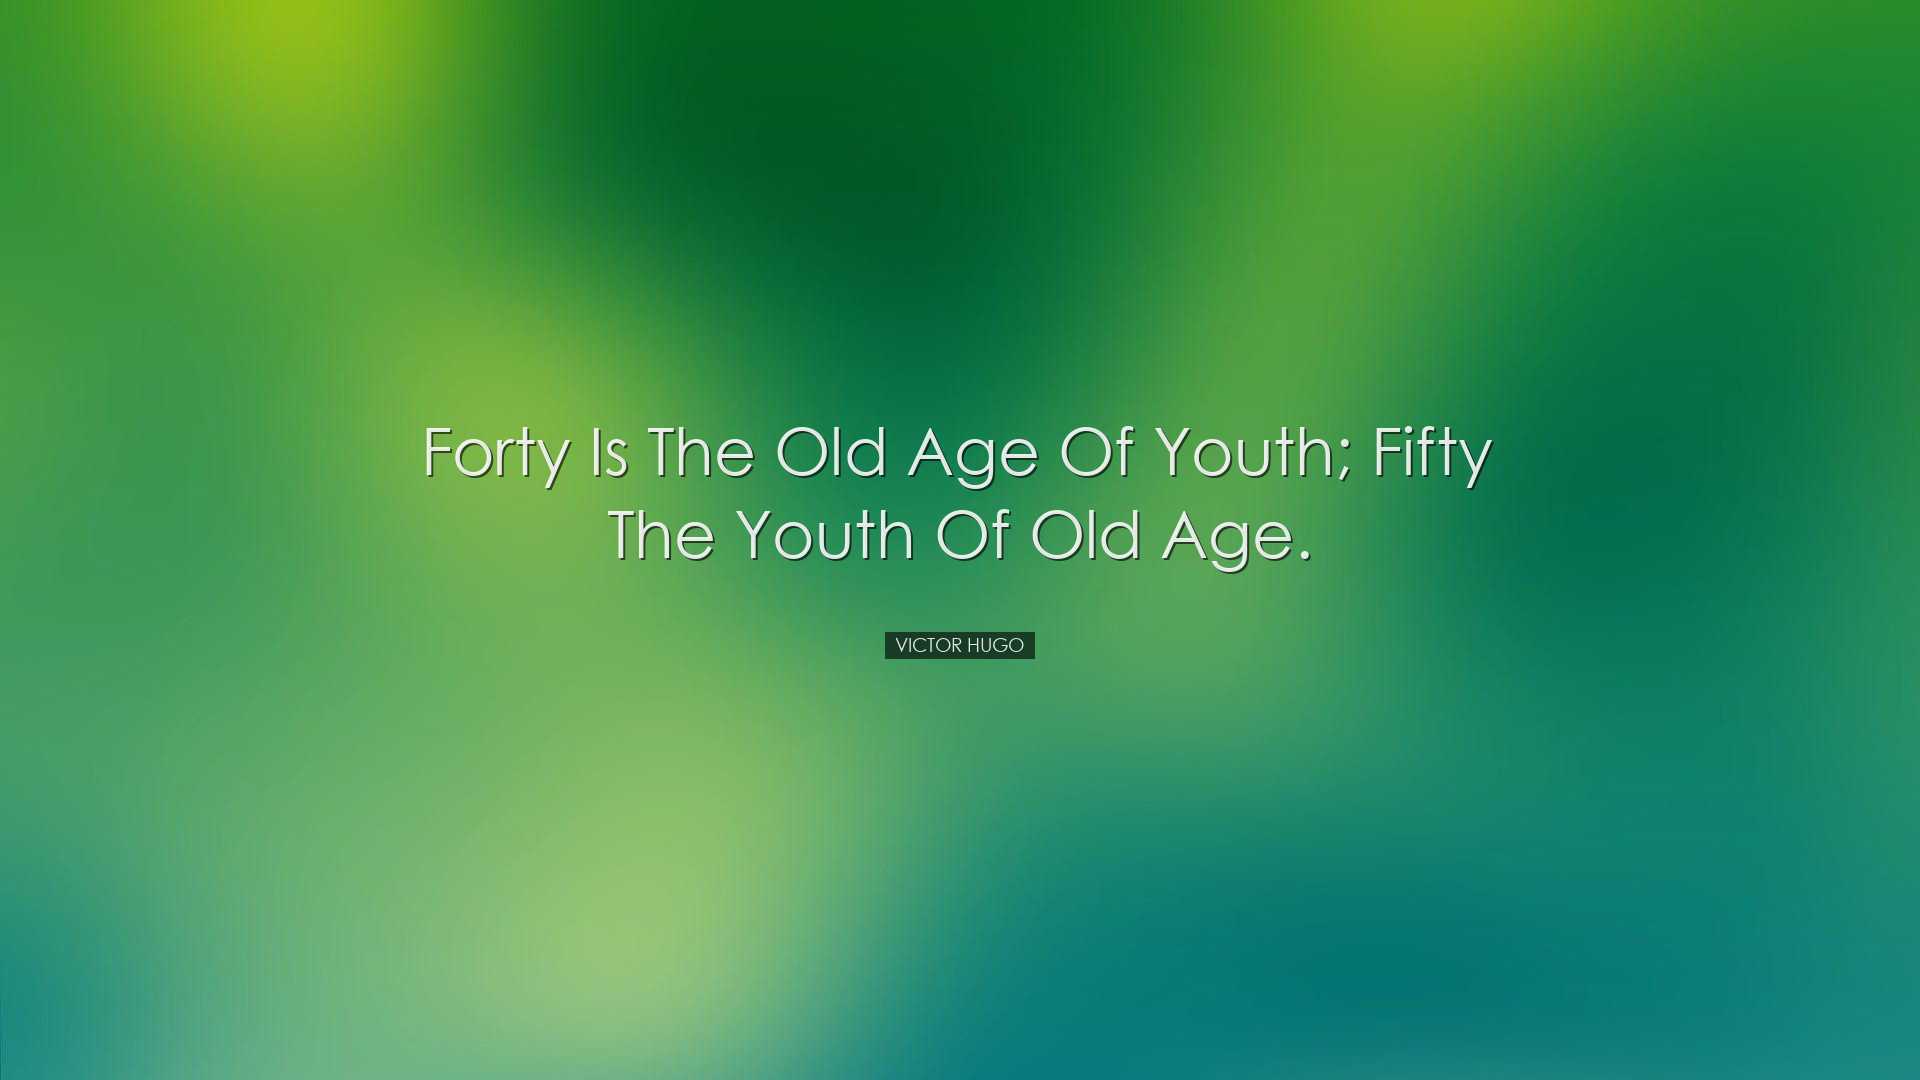 Forty is the old age of youth; fifty the youth of old age. - Victo